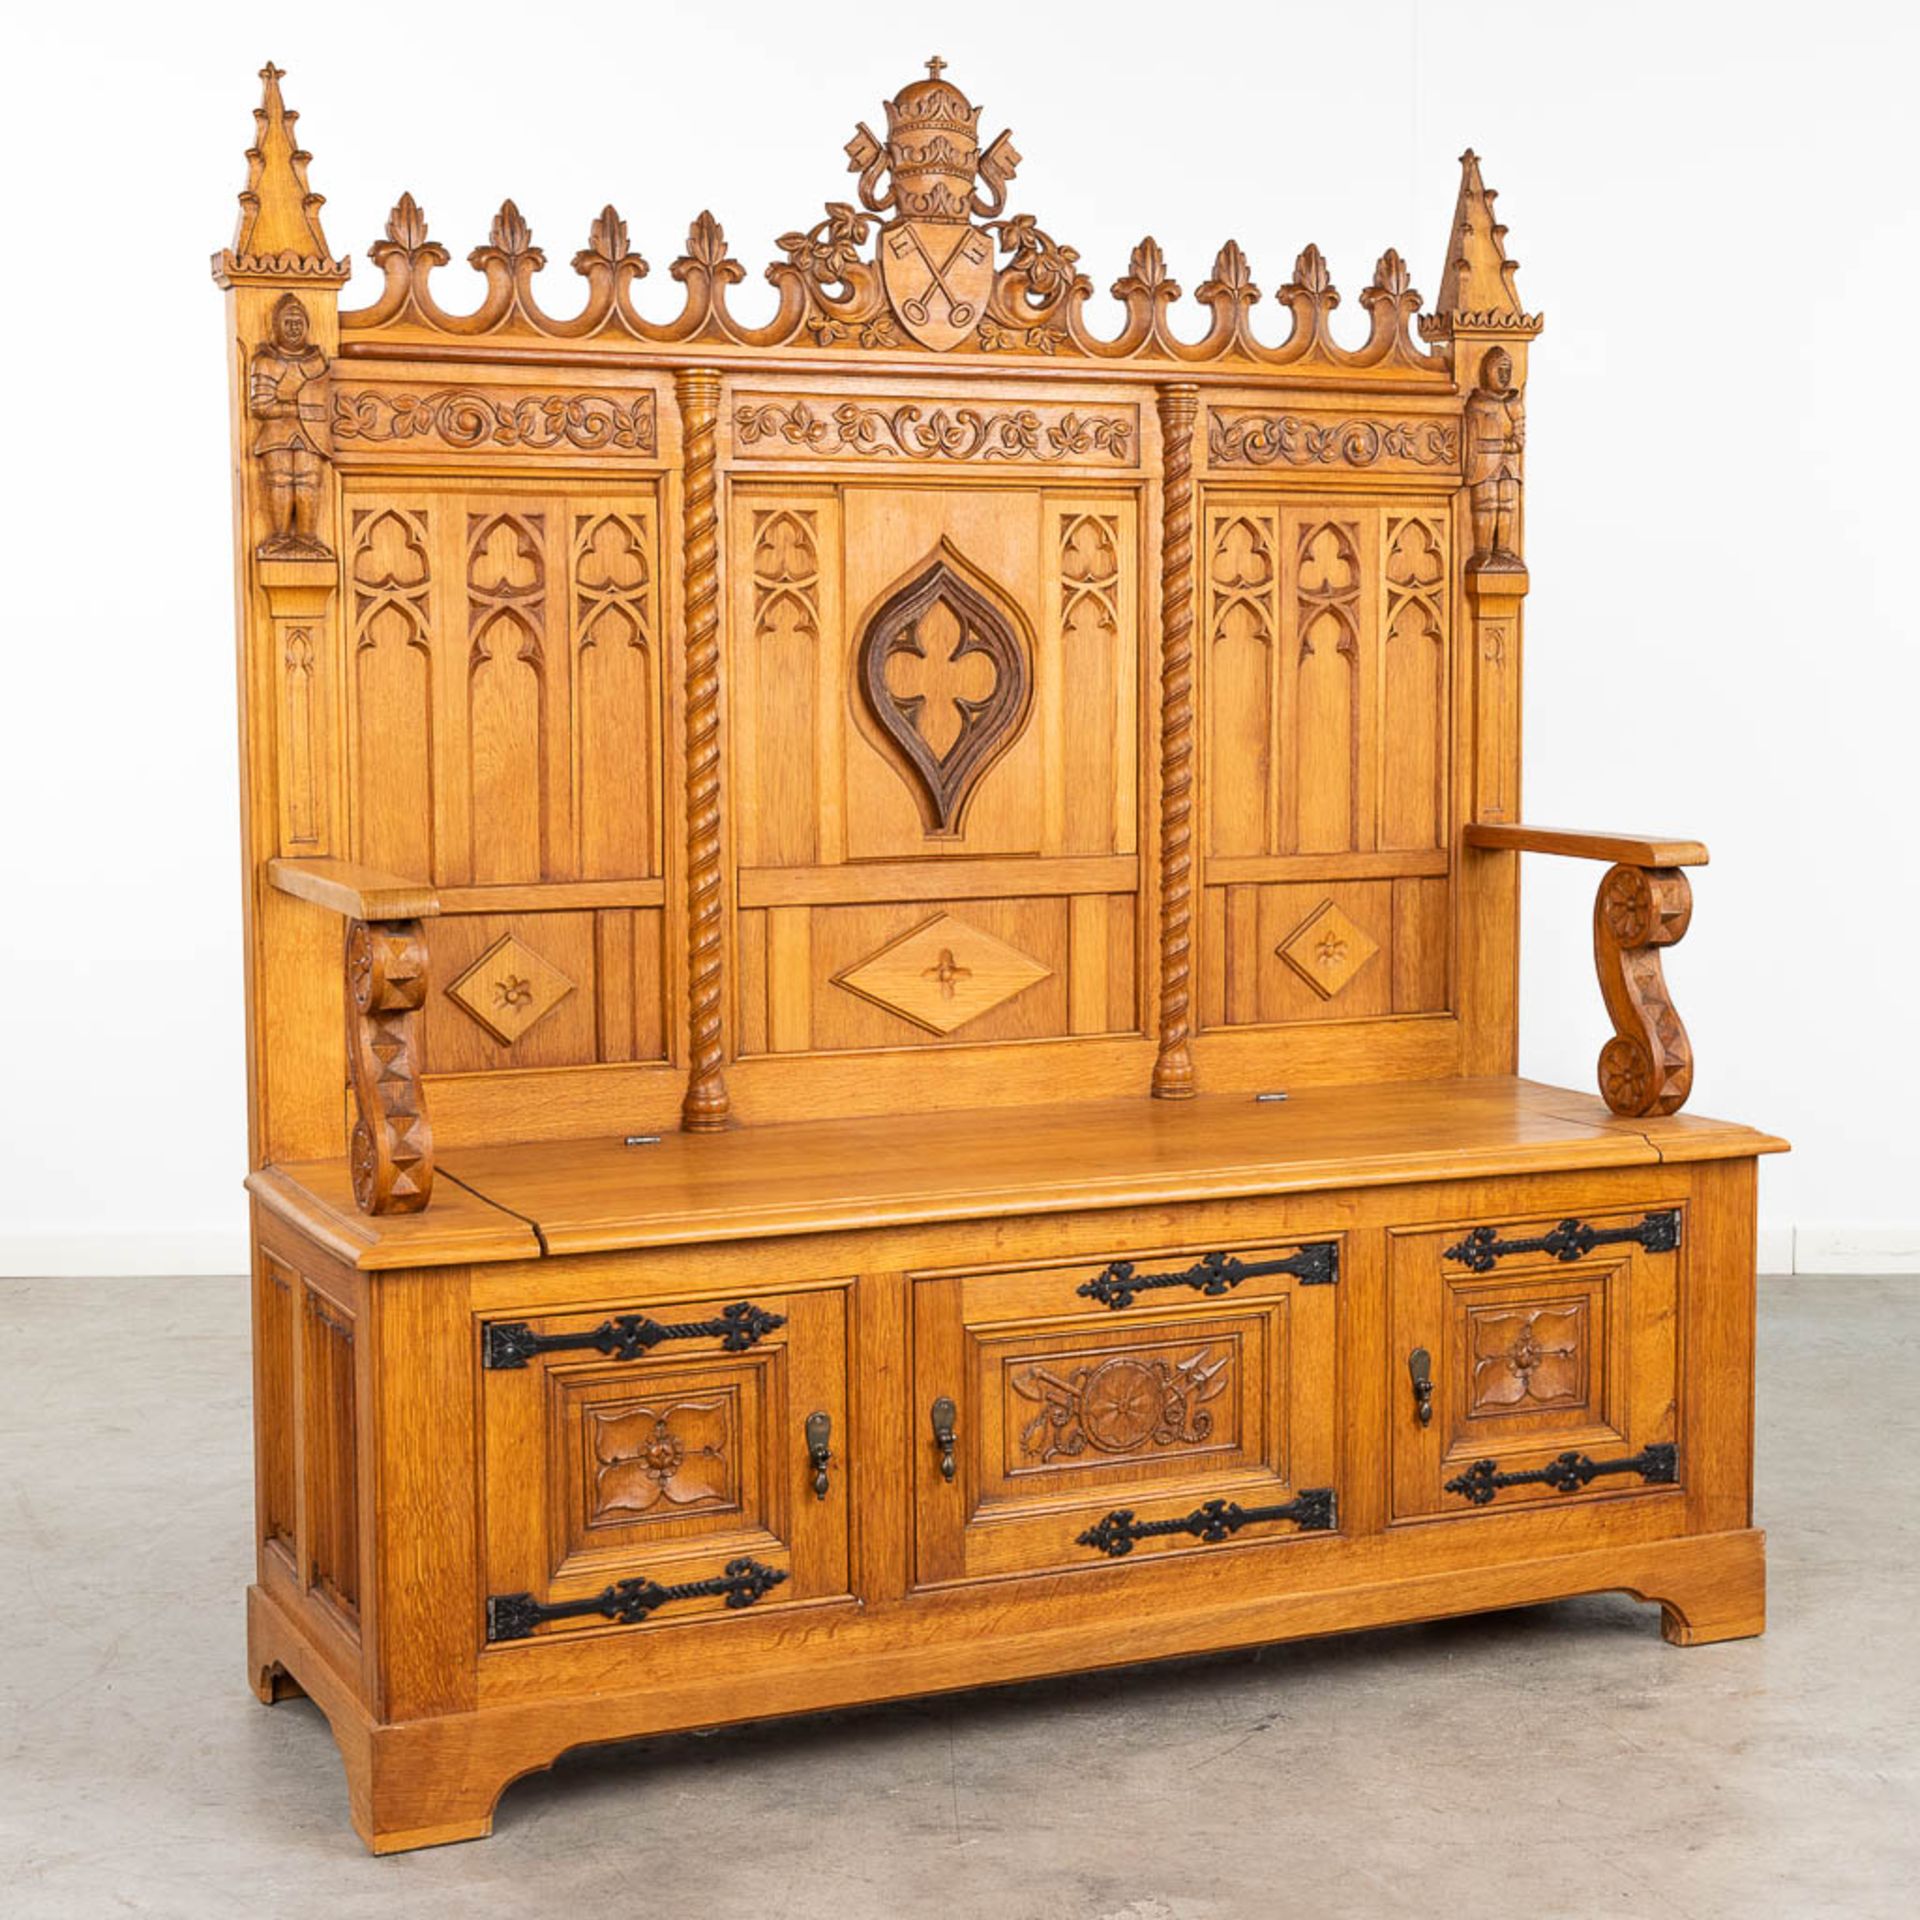 A large and antique bench finished with wood sculptured in a Gothic Revival style. 20th century. (L: